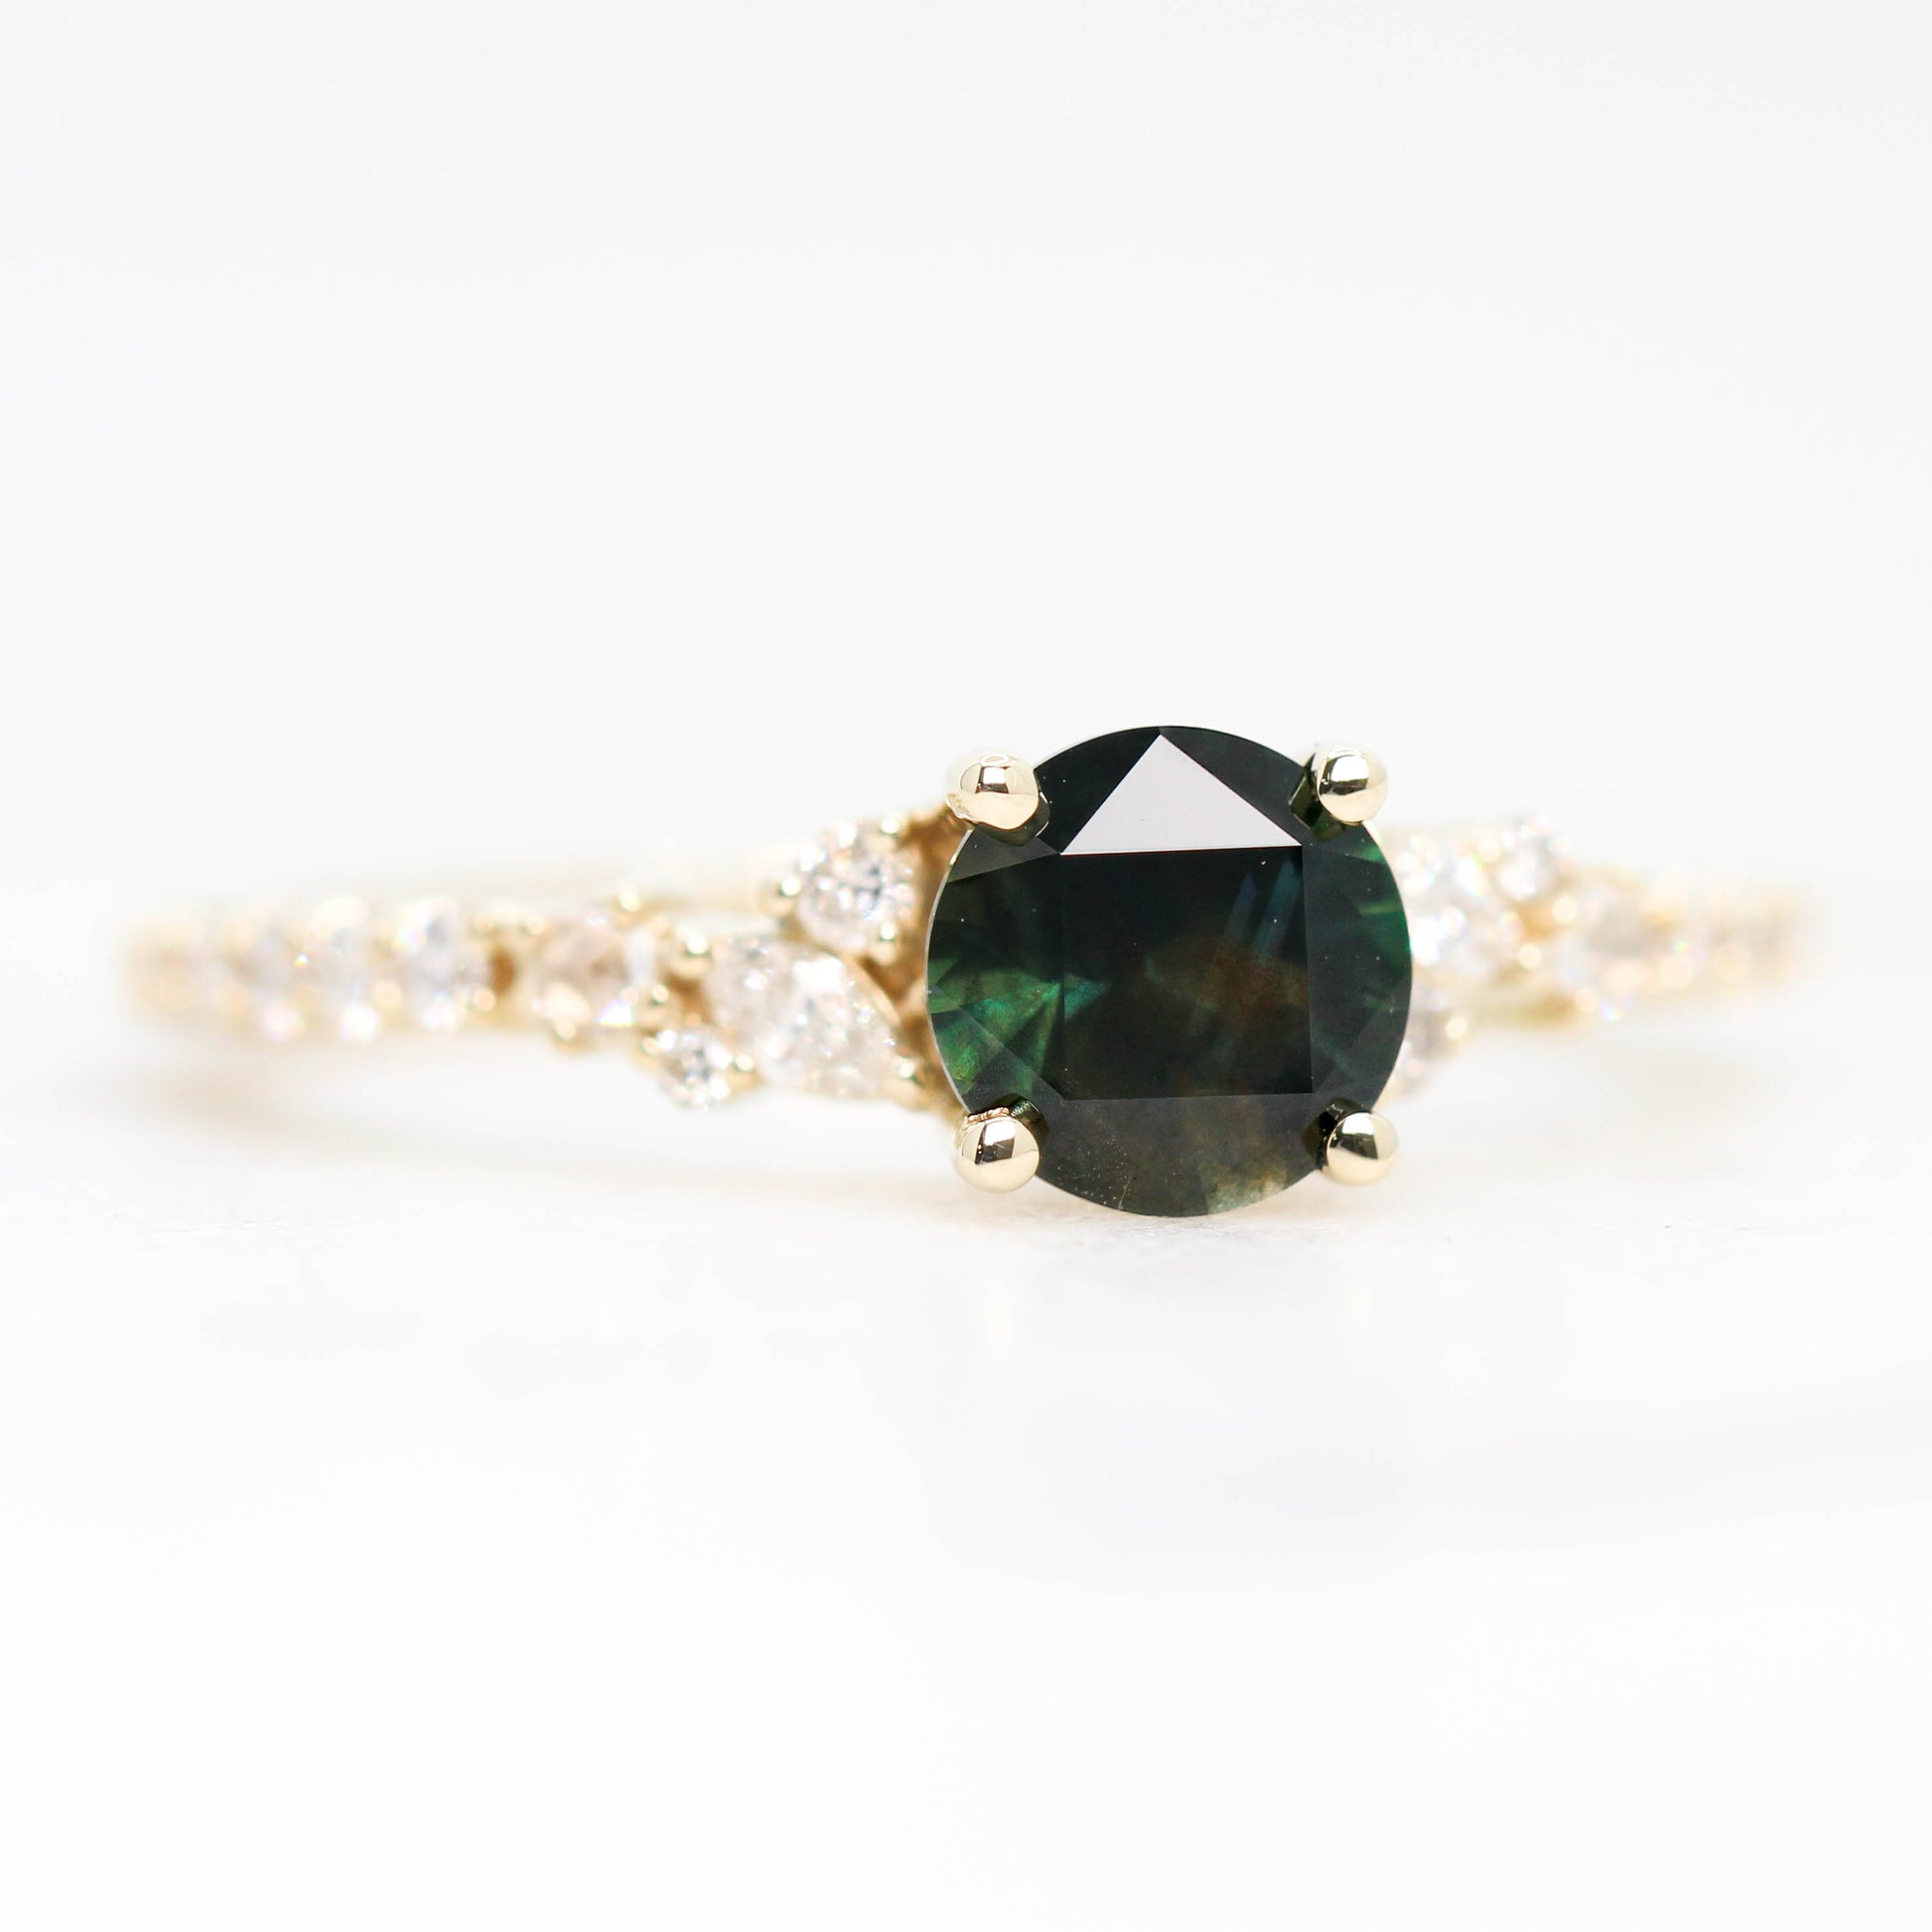 Elodie Ring with a 0.89 Carat Dark Green Unique Cut Sapphire and White Accent Diamonds in 14k Yellow Gold - Ready to Size and Ship - Midwinter Co. Alternative Bridal Rings and Modern Fine Jewelry